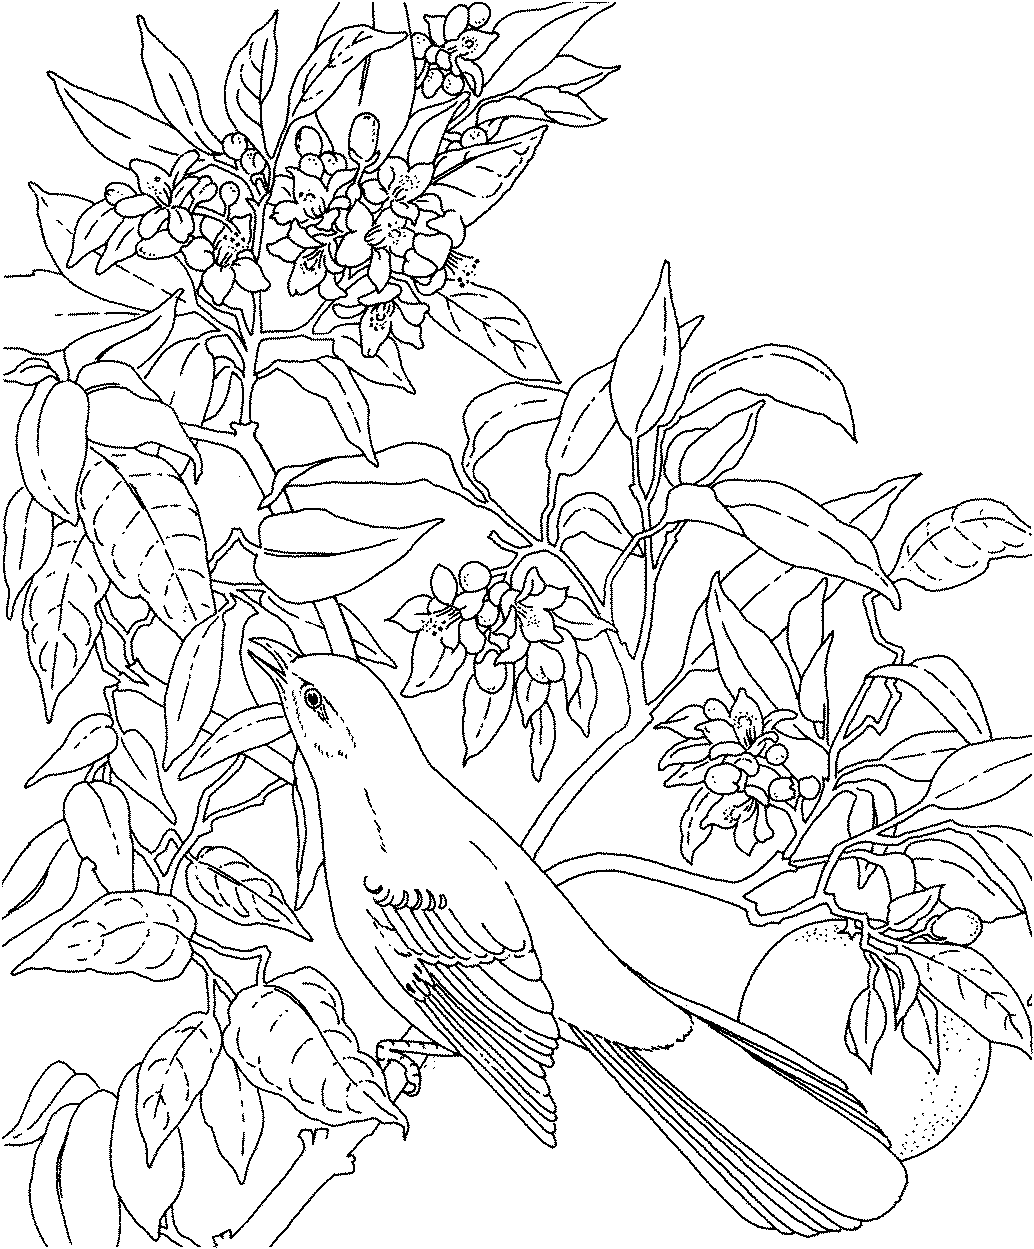 Download Flower Coloring Pages for Adults - Best Coloring Pages For ...